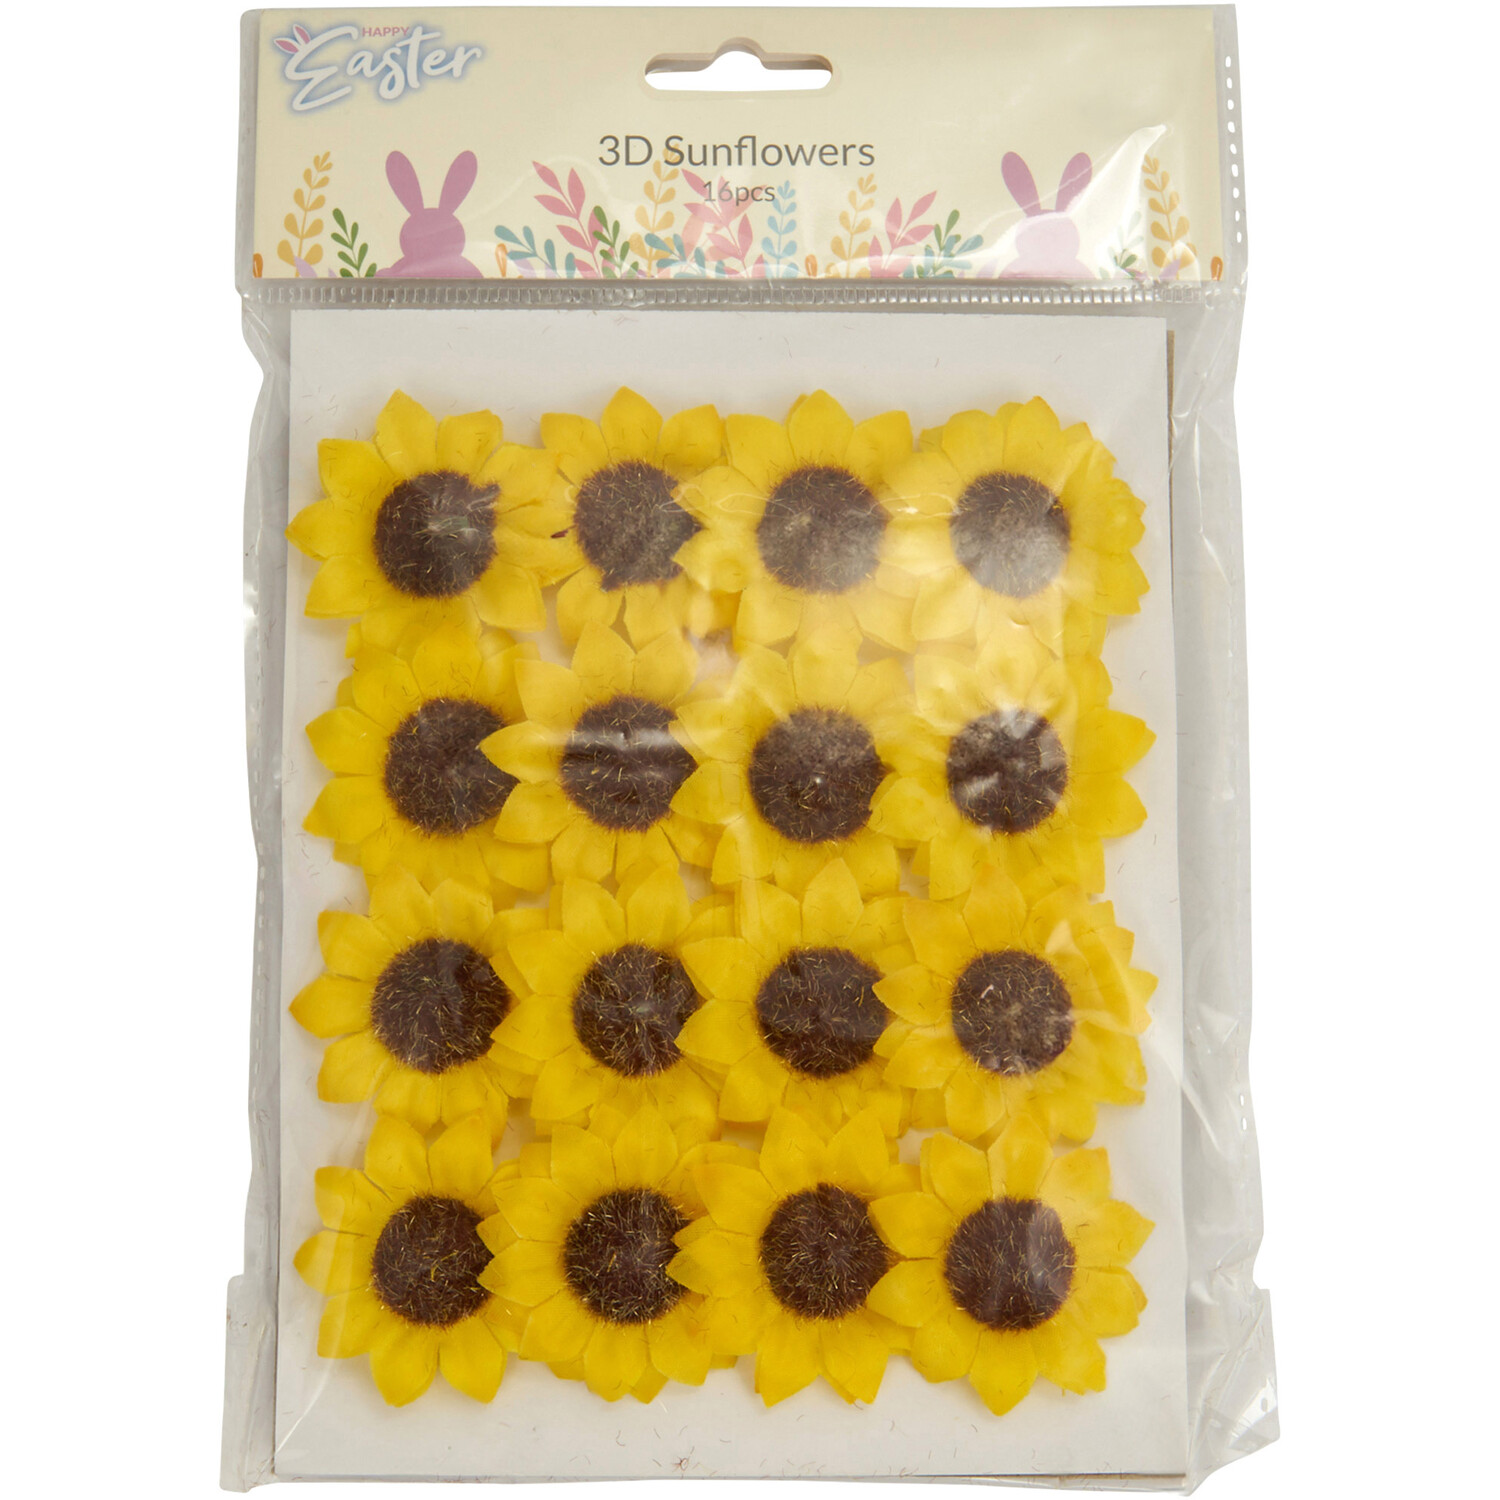 Easter 3D Sunflowers 16 Pack Image 1